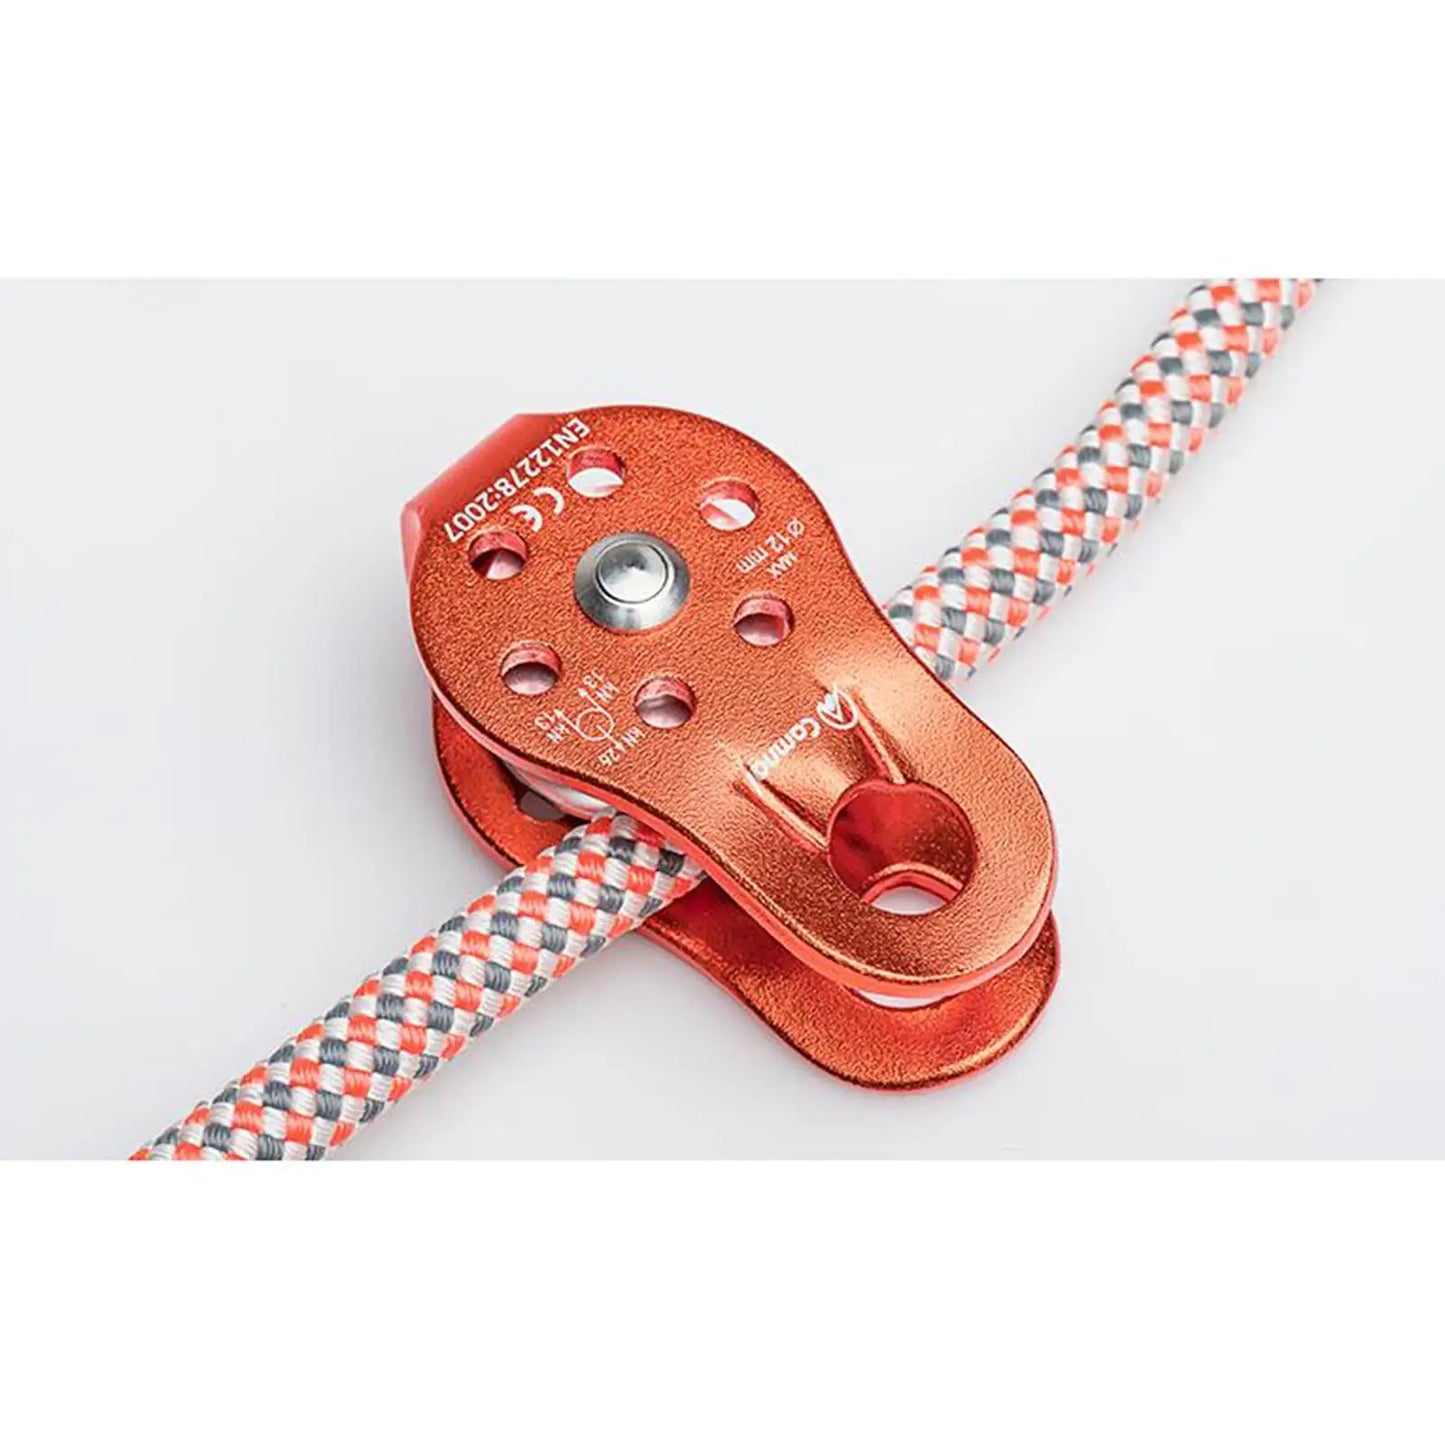 Heavy Duty Rope Pulley - Arborist Rock Climbing Gear for Rescuing & Lifting - Fast Speed Cable Trolley